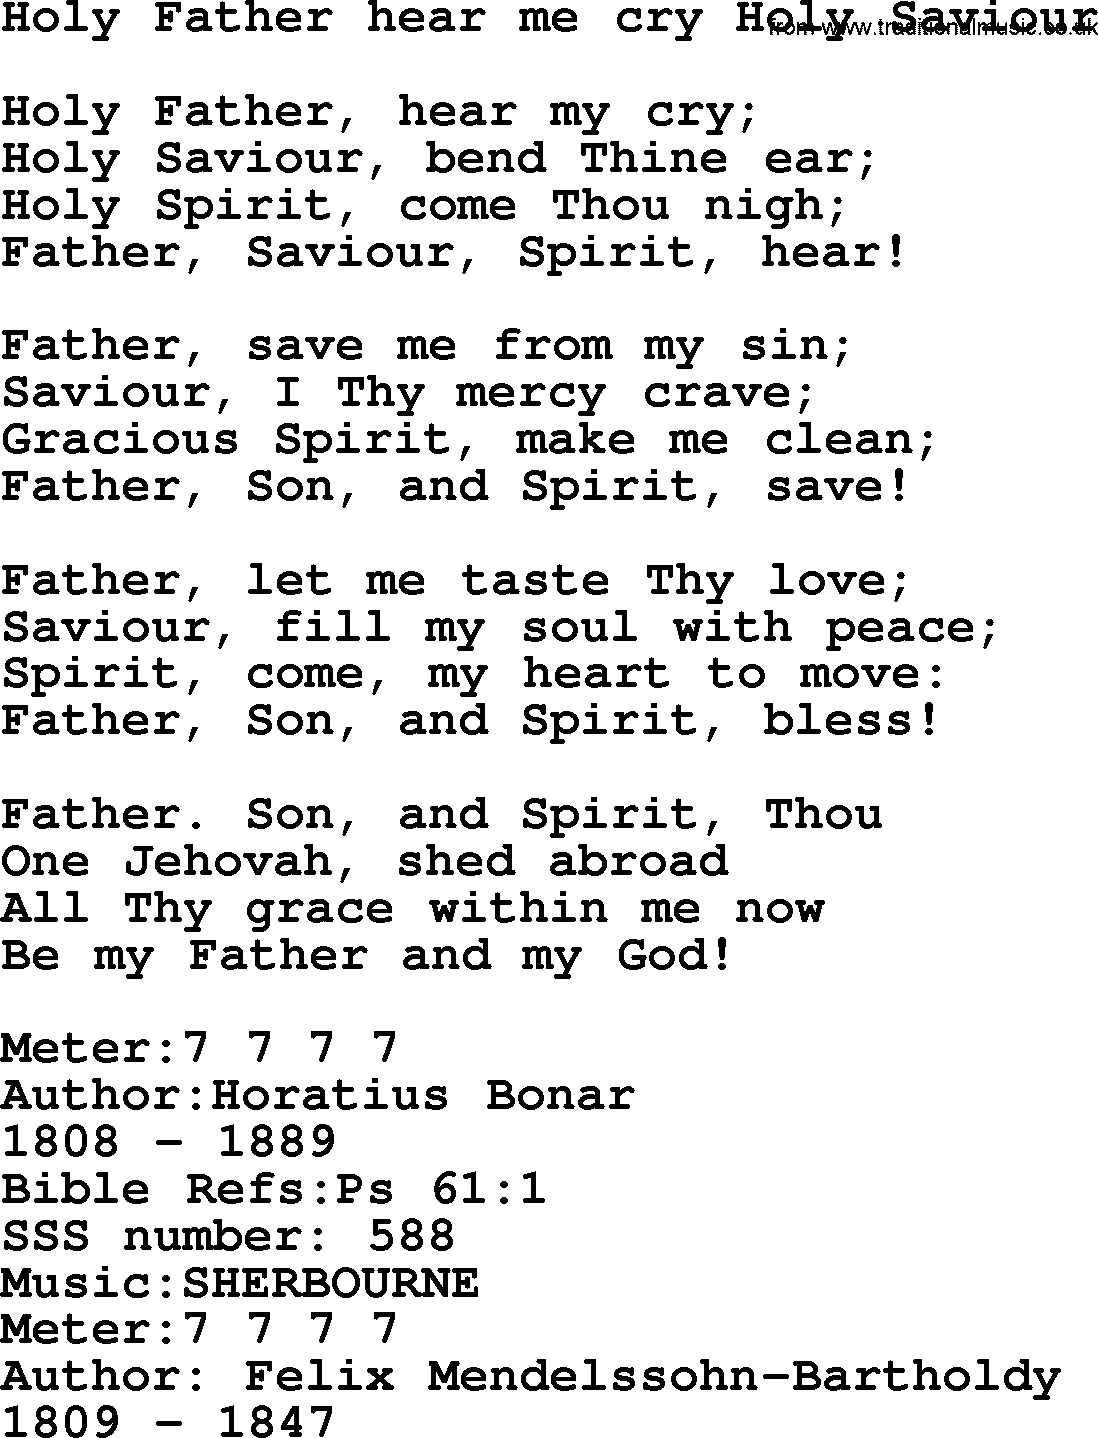 Sacred Songs and Solos complete, 1200 Hymns, title: Holy Father Hear Me Cry Holy Saviour, lyrics and PDF